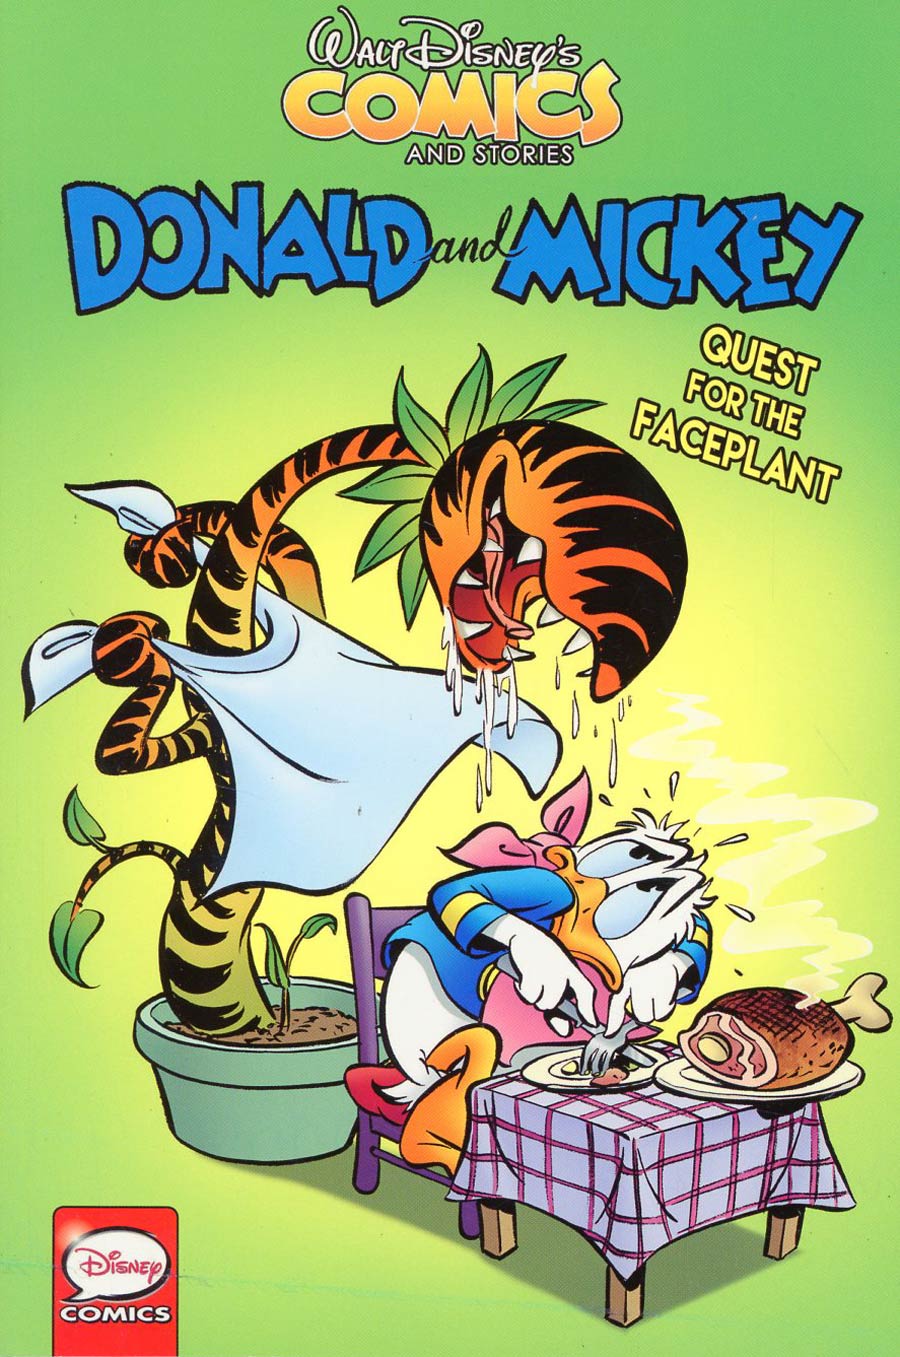 Walt Disneys Comics & Stories Donald And Mickey Quest For The Faceplant TP